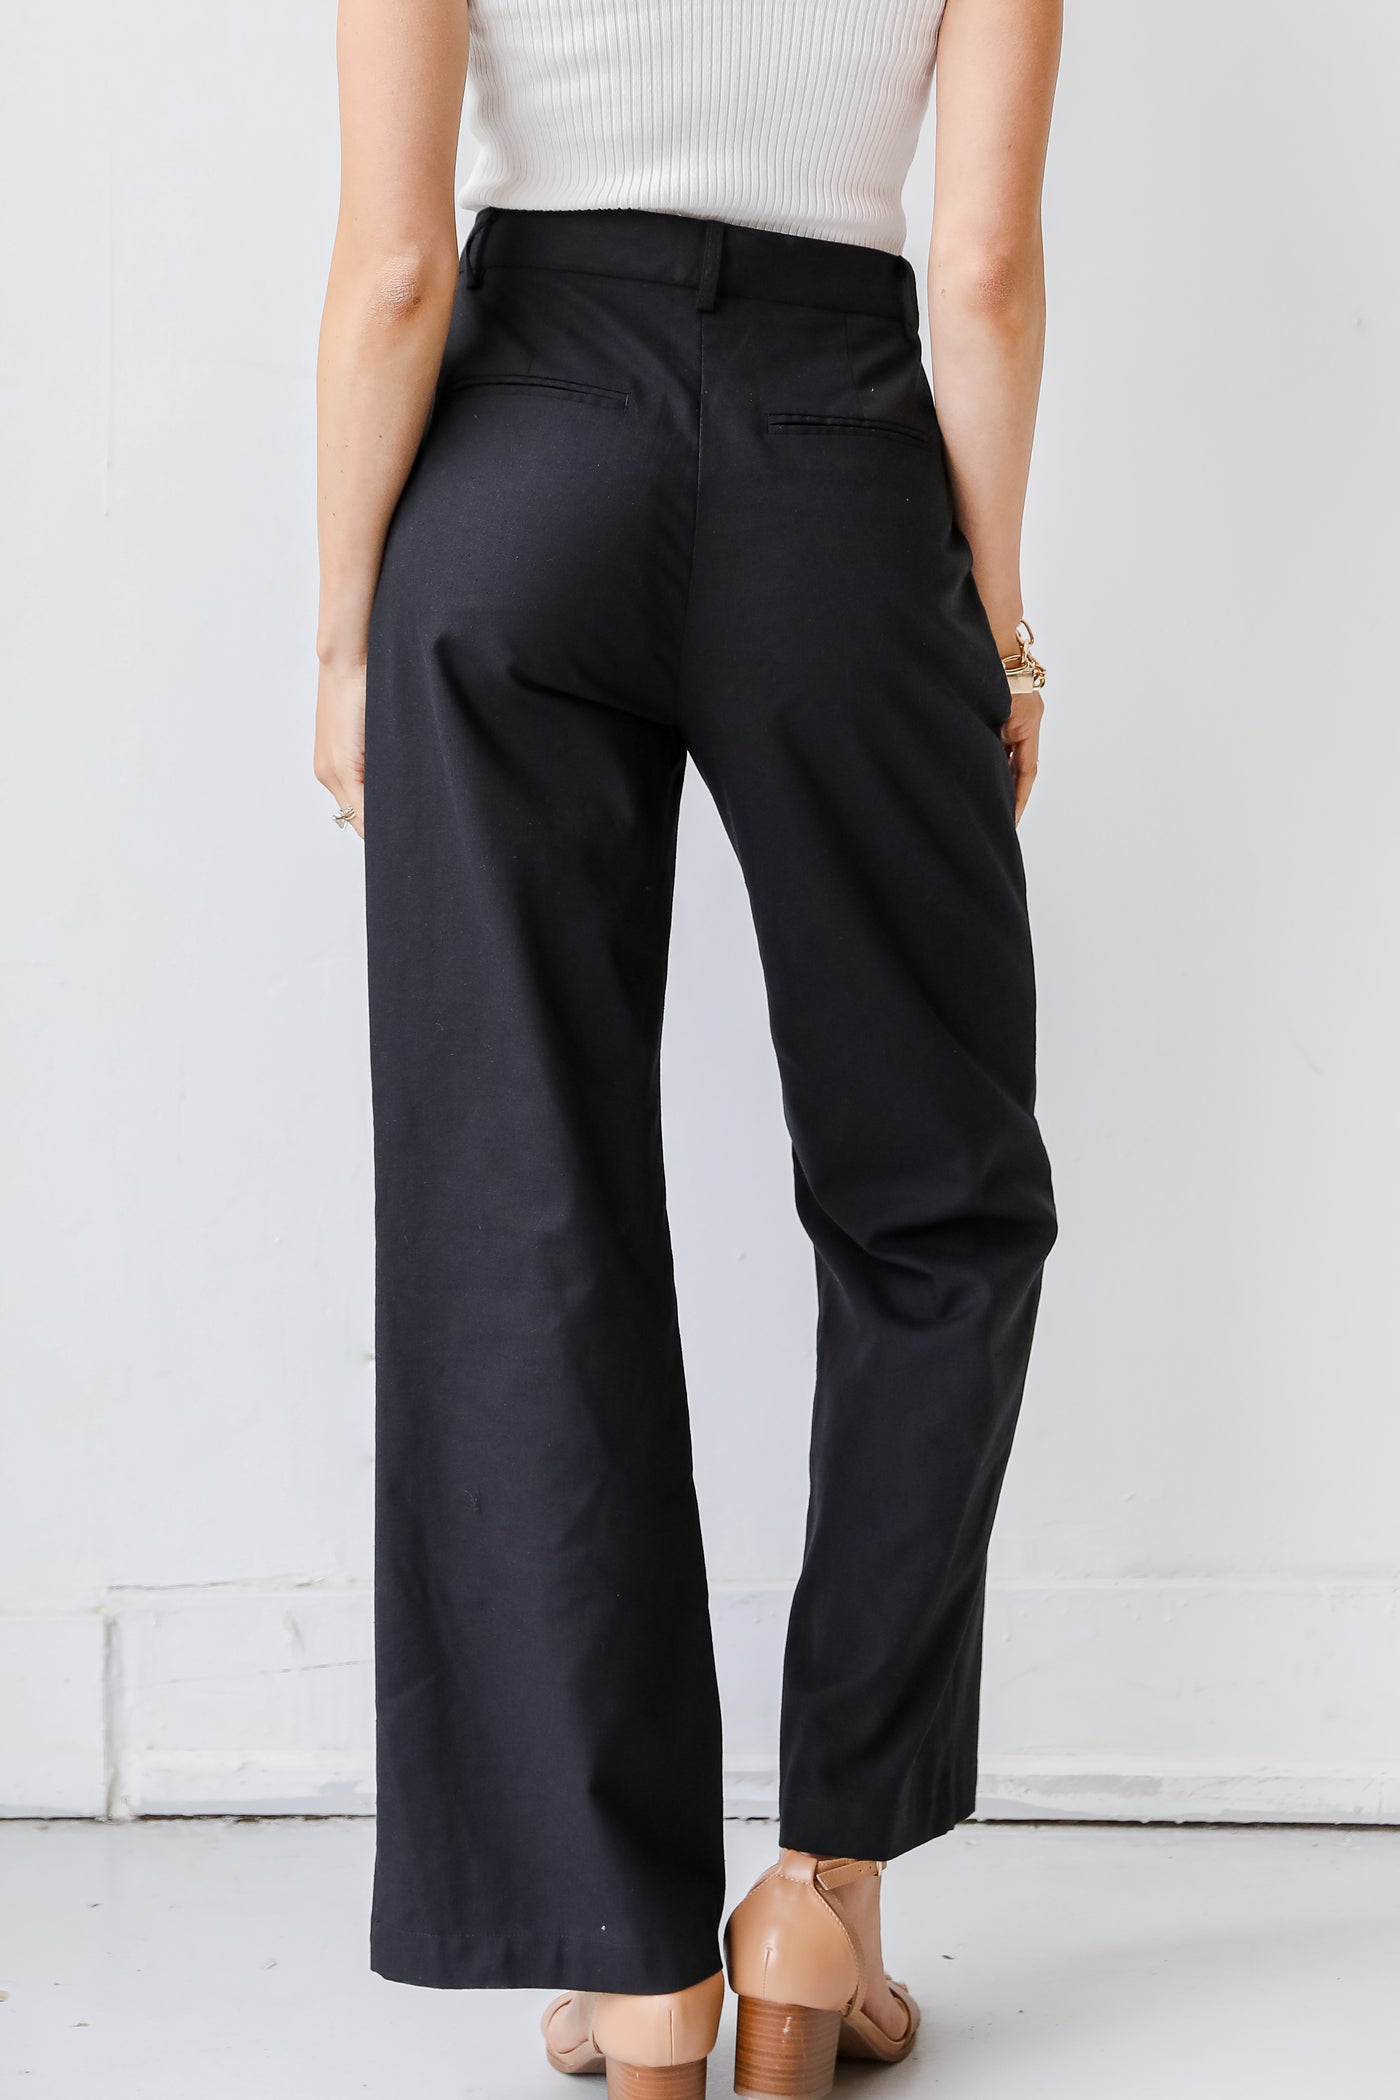 Trouser Pants in black back view